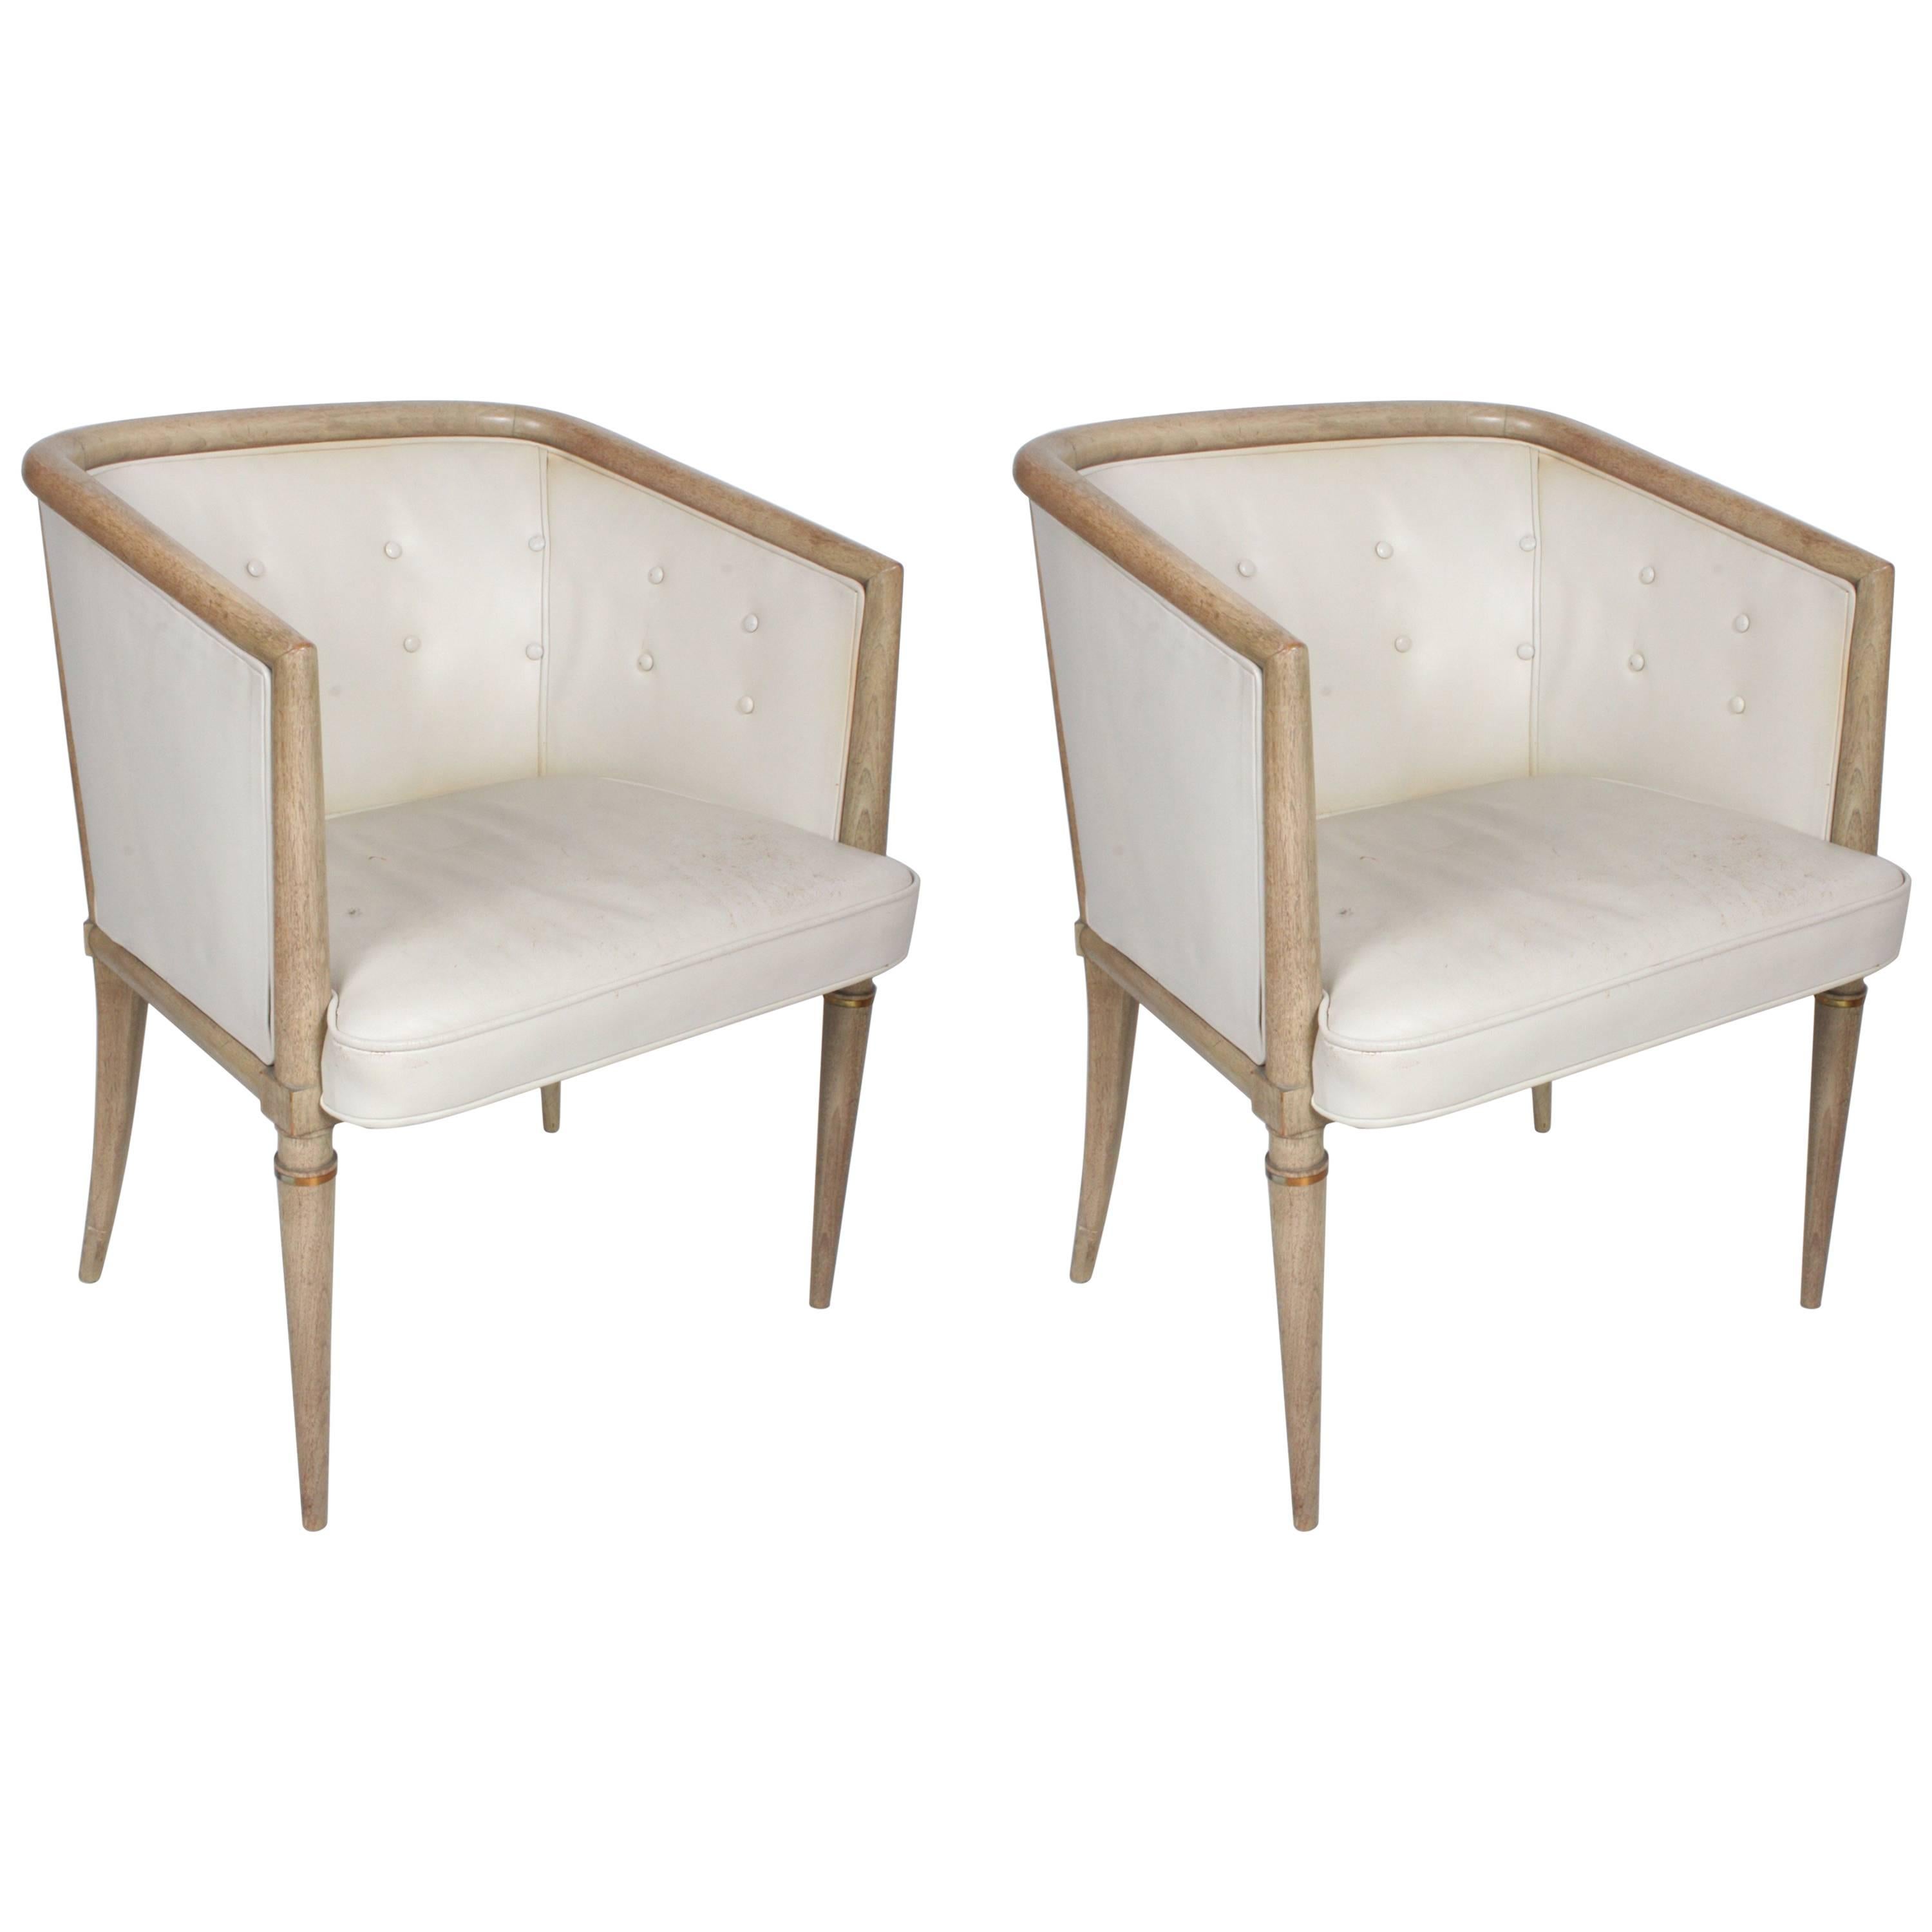 Pair of Mid-Century Modern Occasional Chairs in the Style of Tommi Parzinger